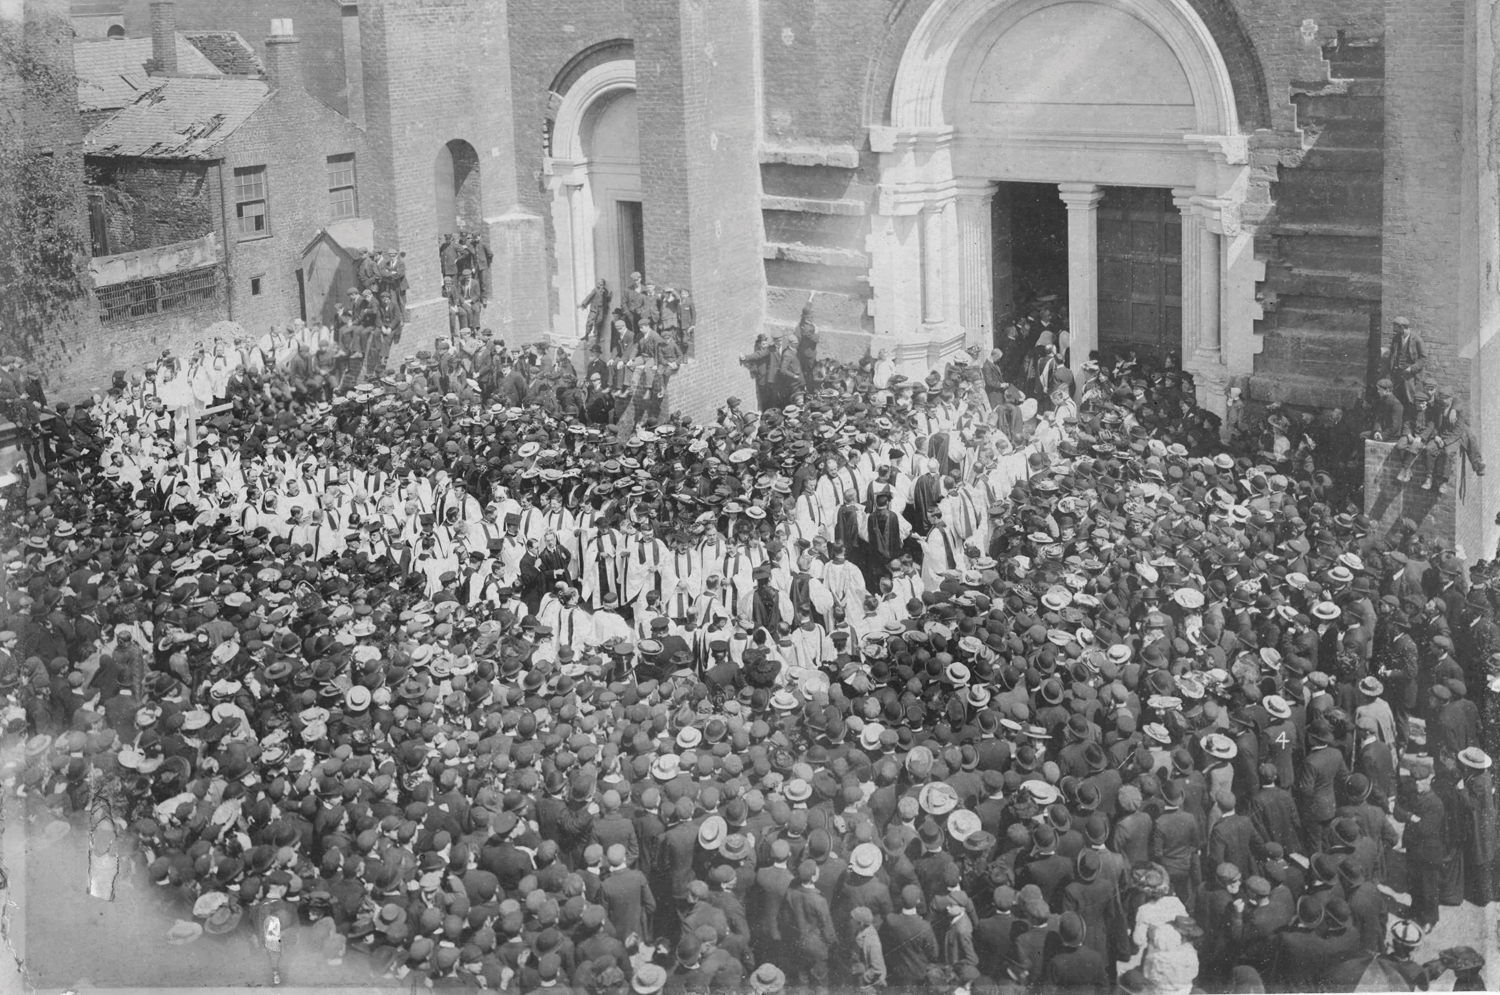 Crowds flock to witness the Consecration of the Nave of Belfast Cathedral on June 2 1904.